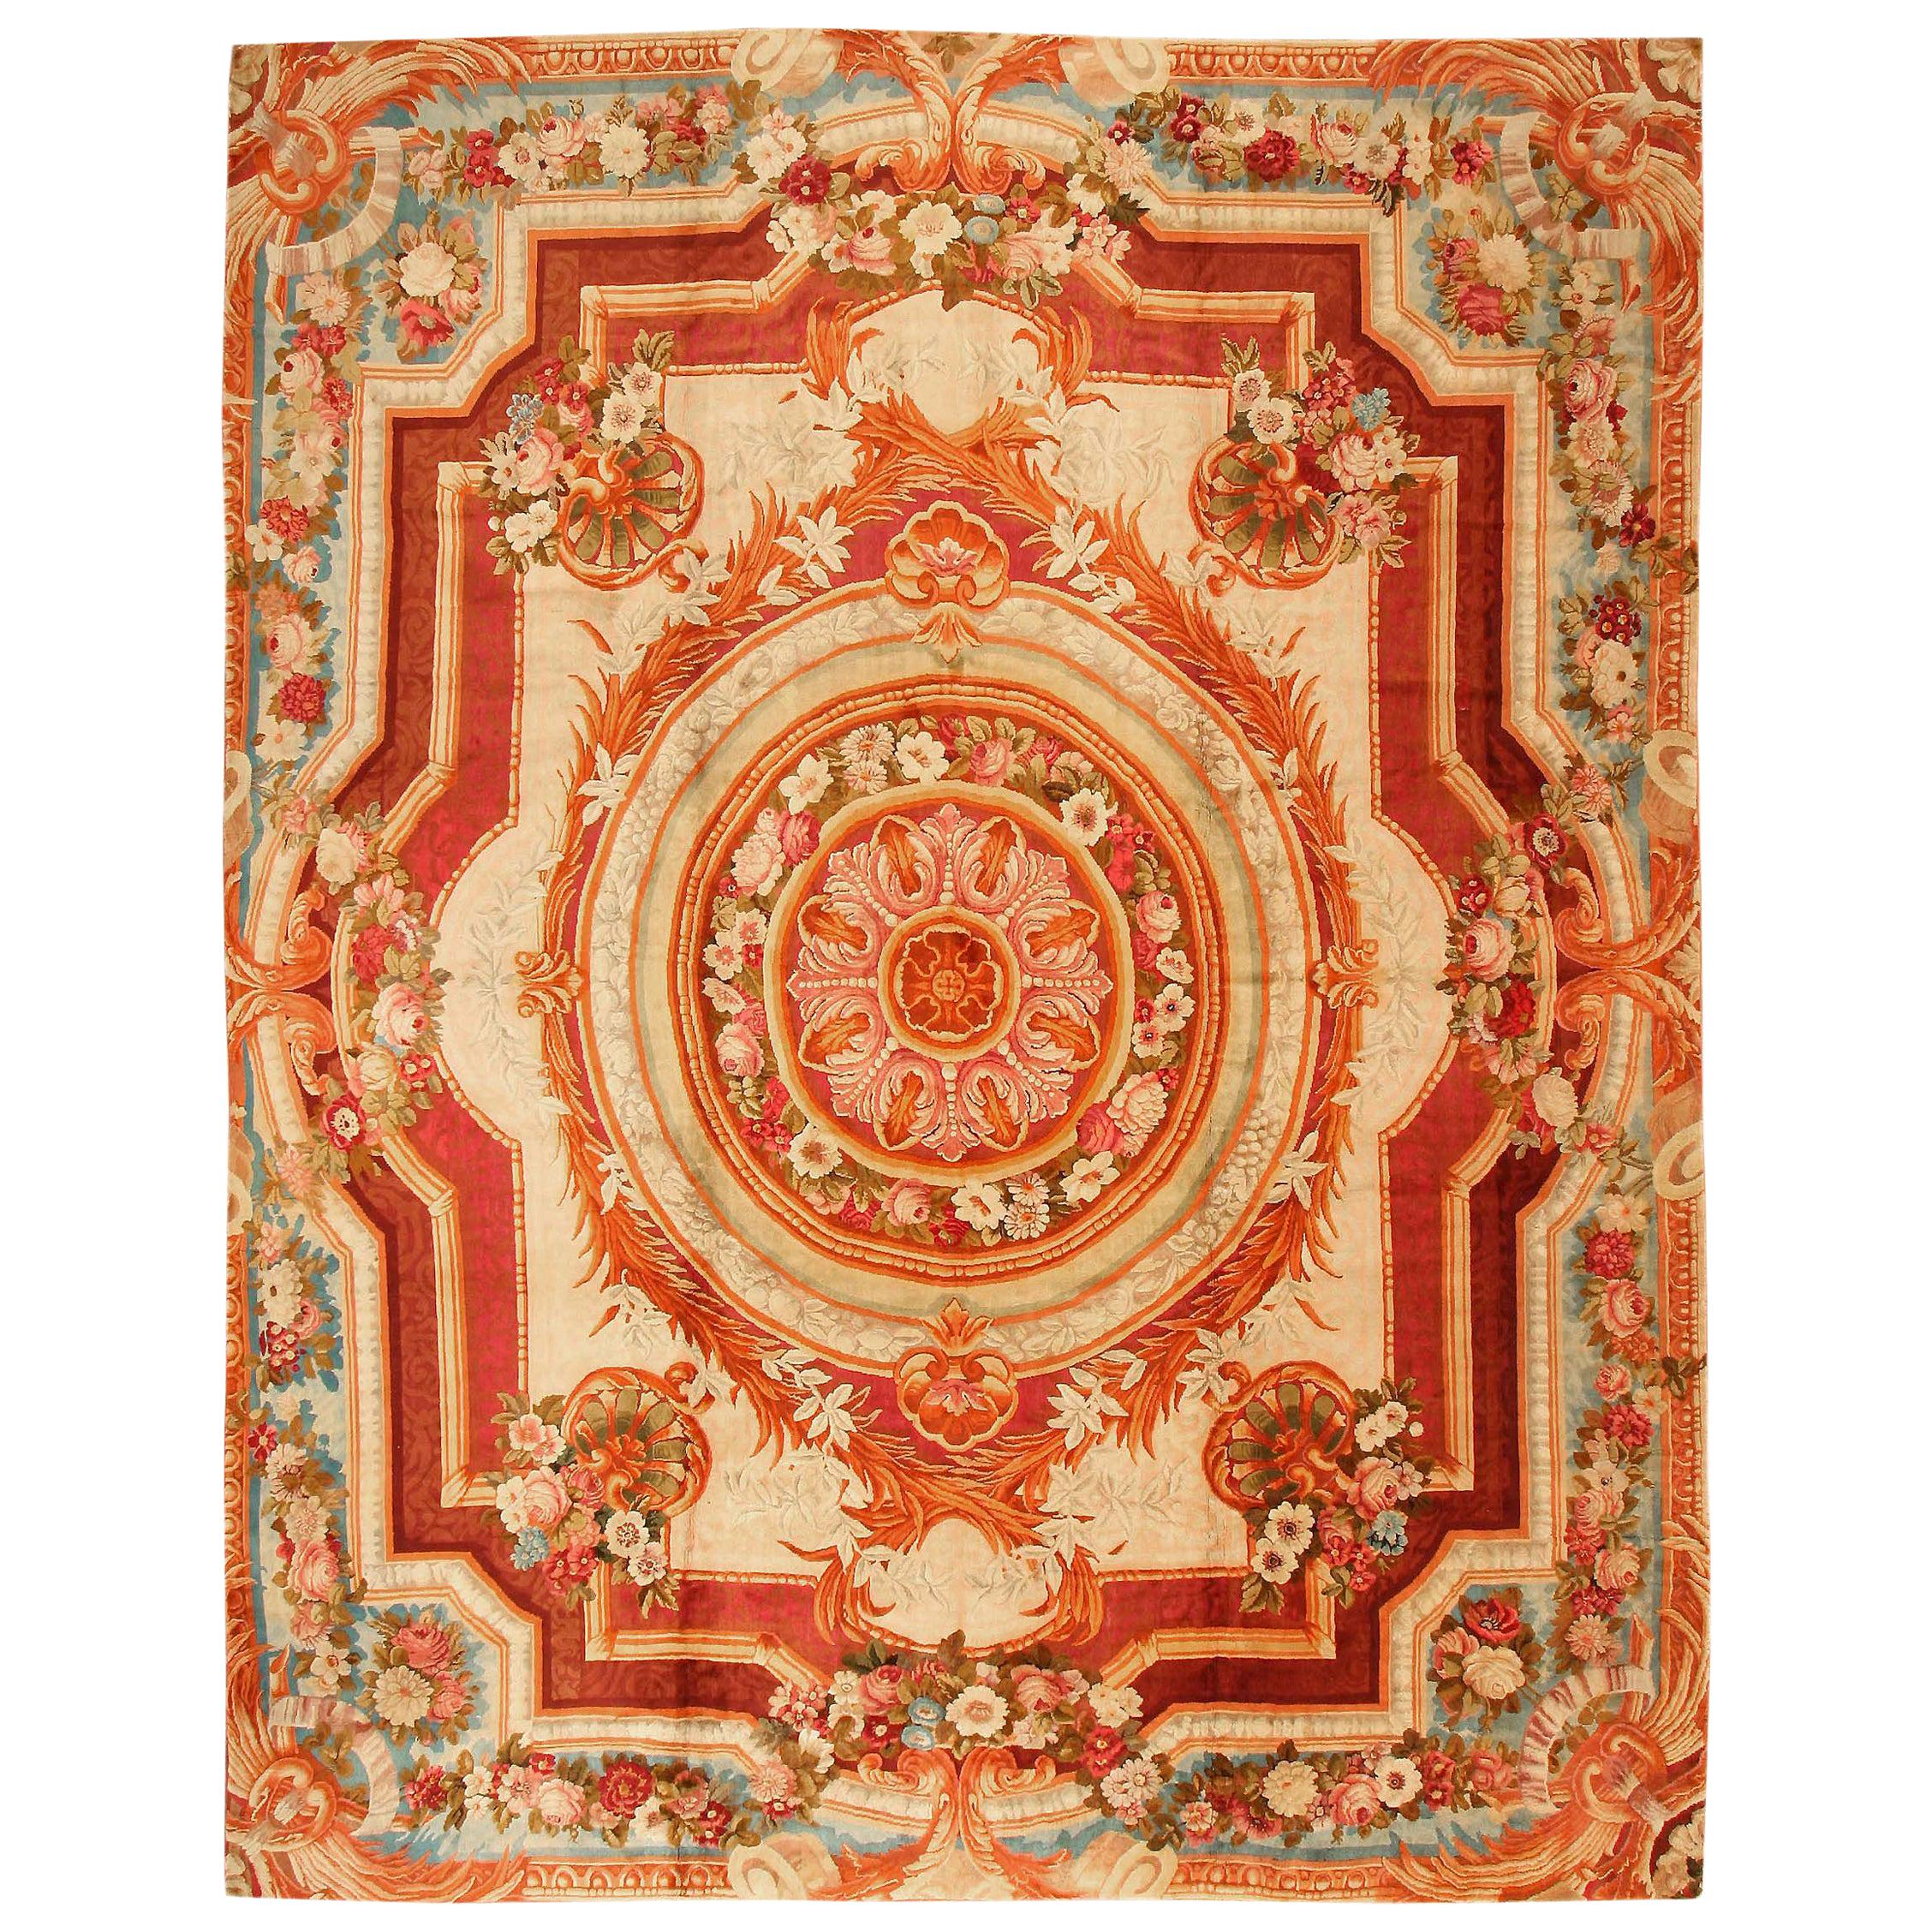 Nazmiyal Collection Antique English Axminster Rug. 15 ft x 18 ft 10 in